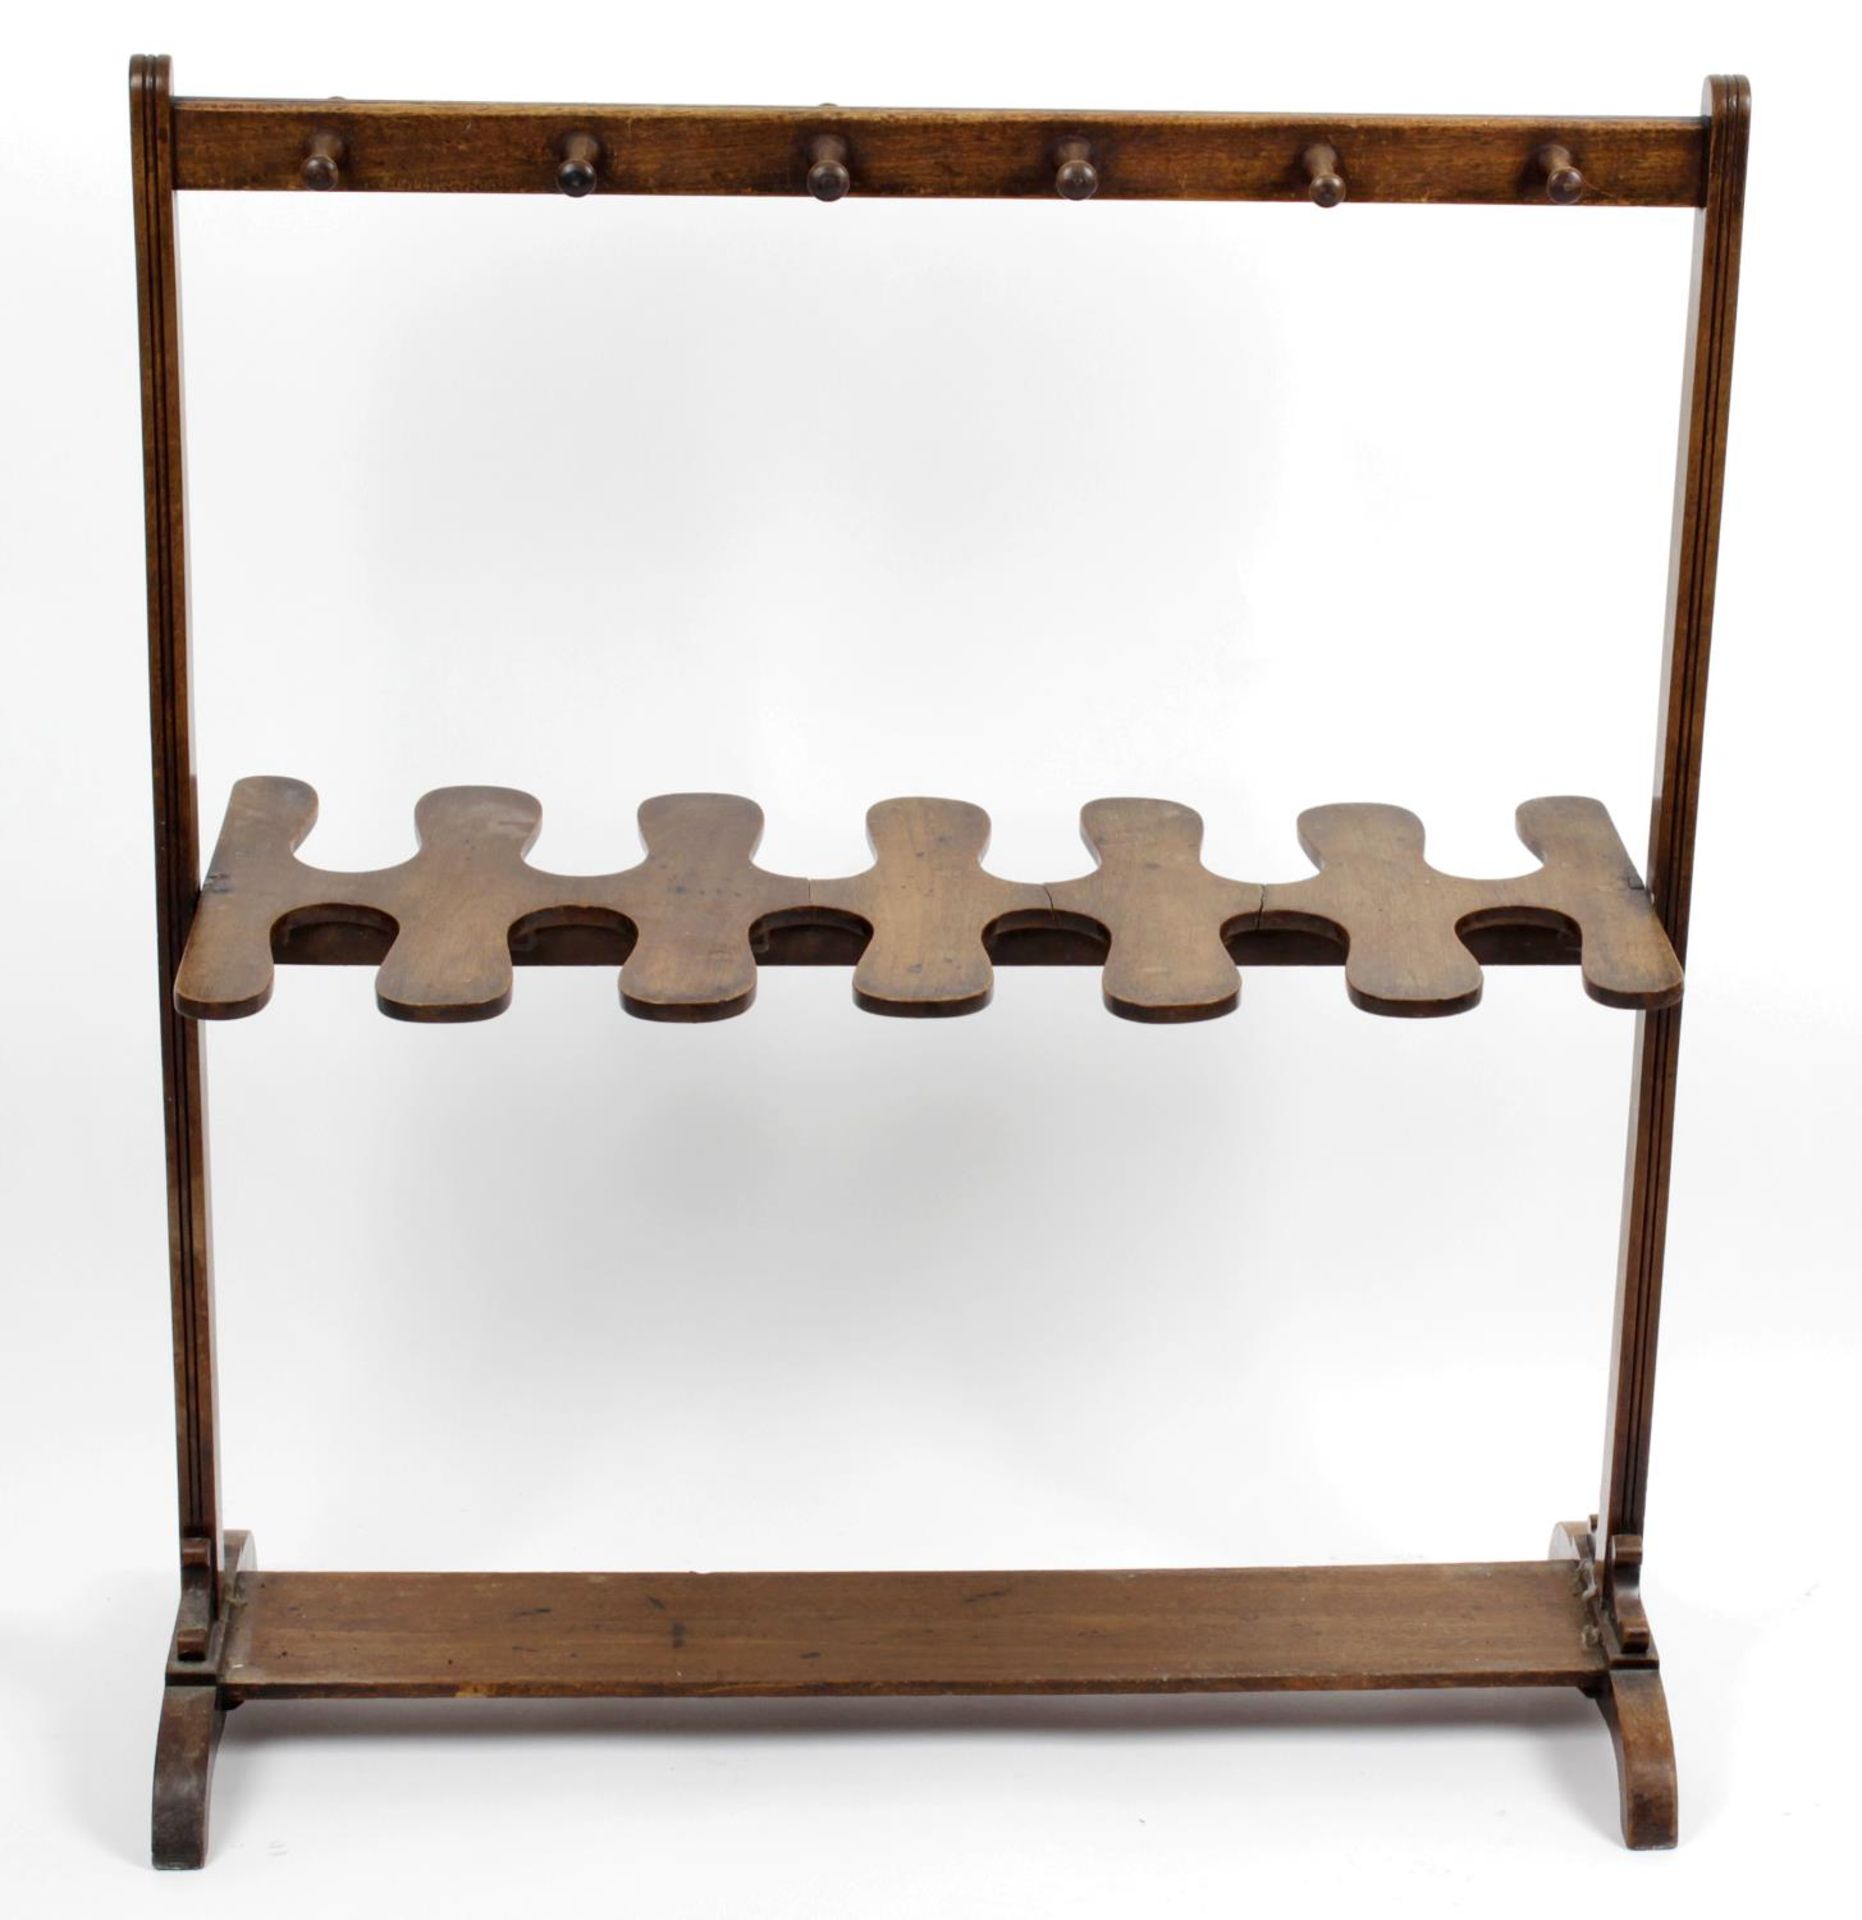 An early 20th century mahogany boot rack and riding crop stand,